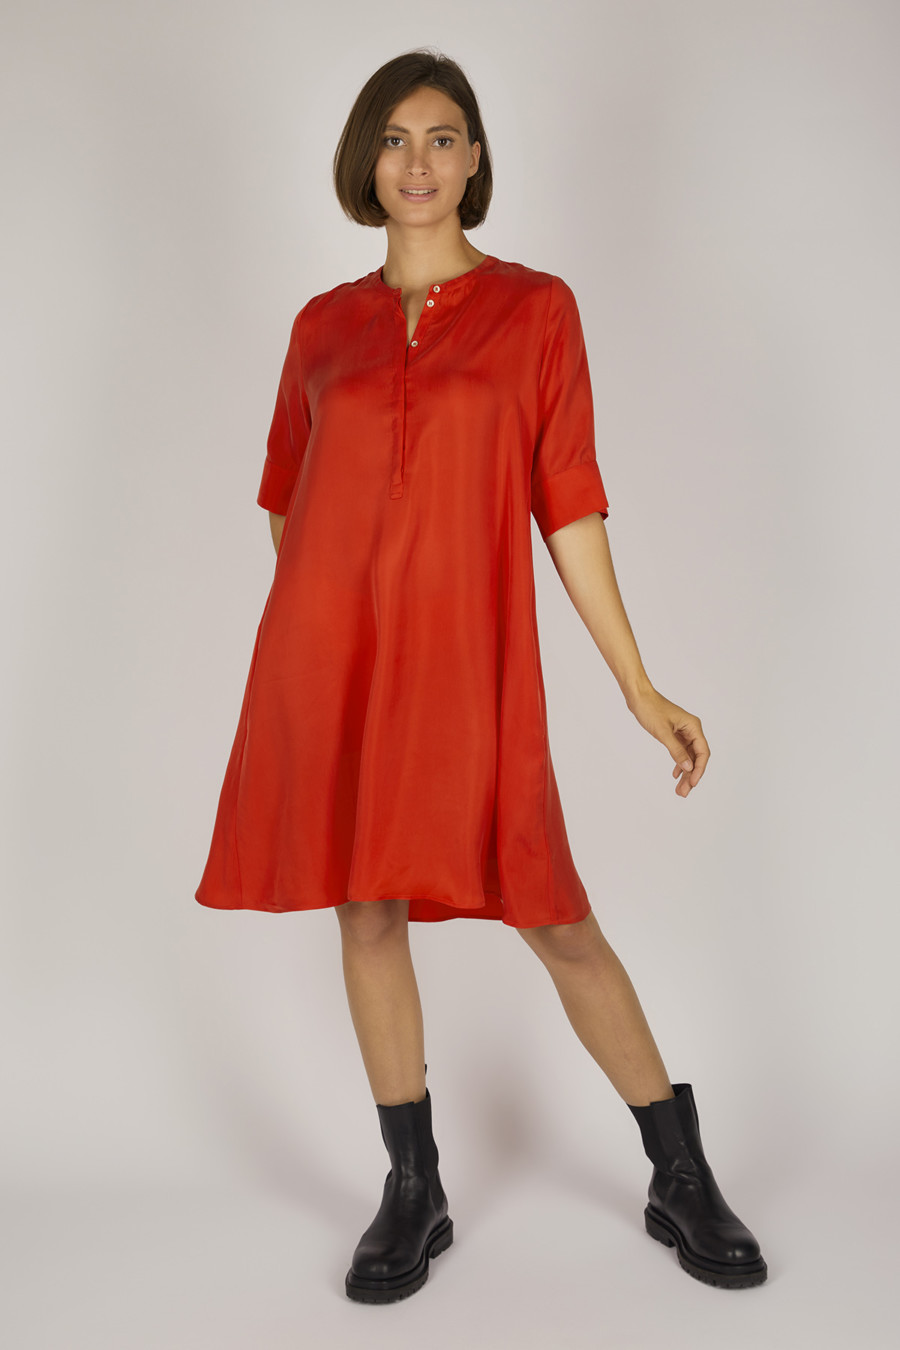 PHOEBE - Midi dress with round neckline - Color: Red Hot